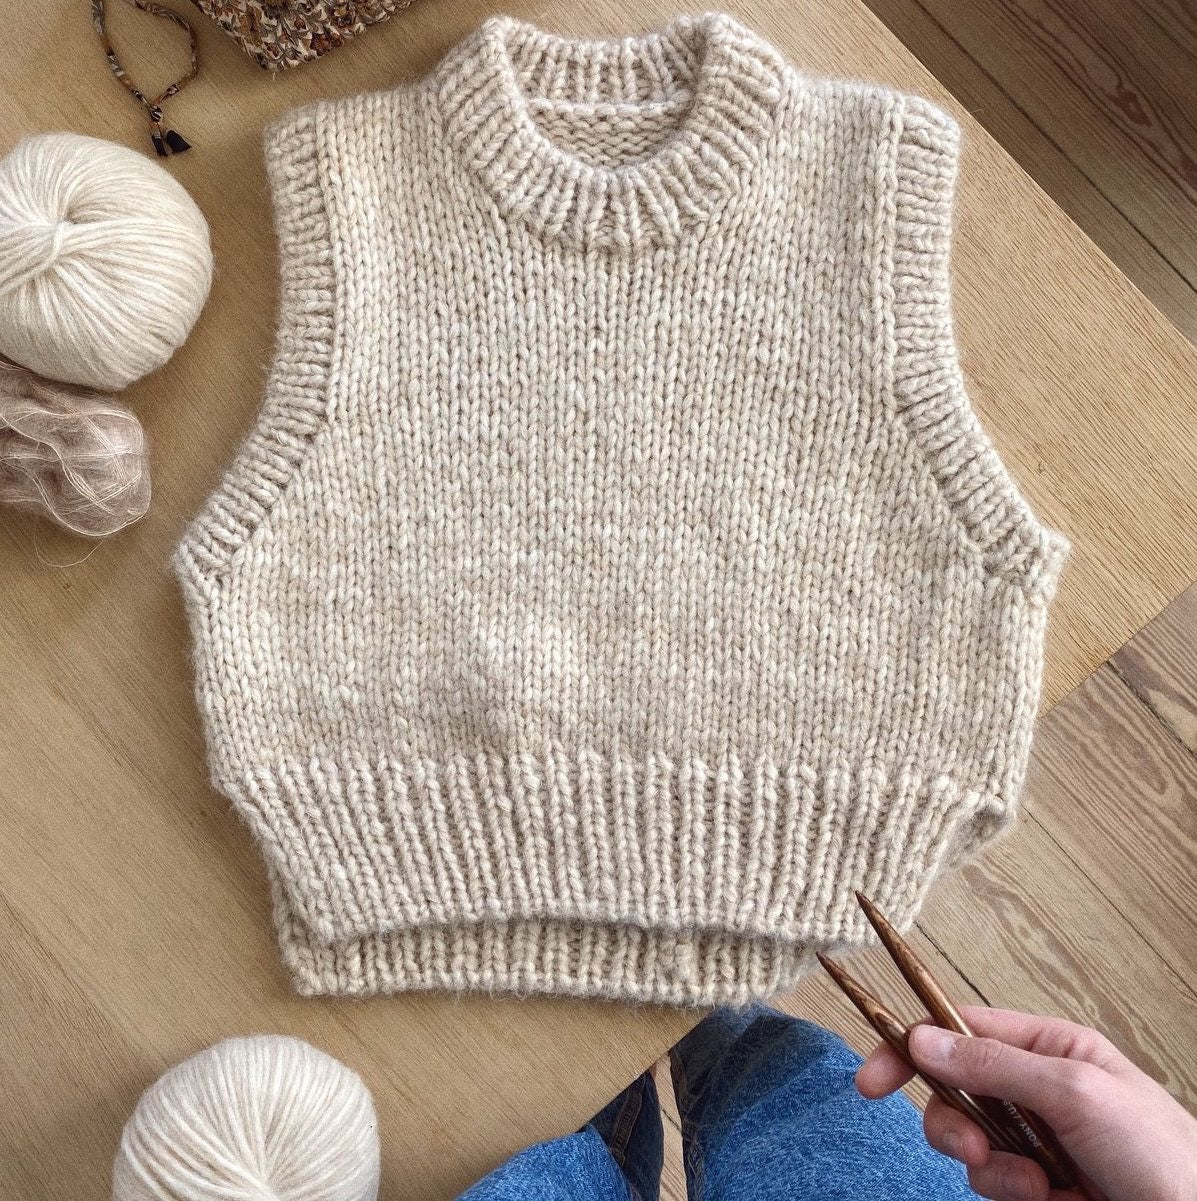 How to knit a sweater vest – Tagged 